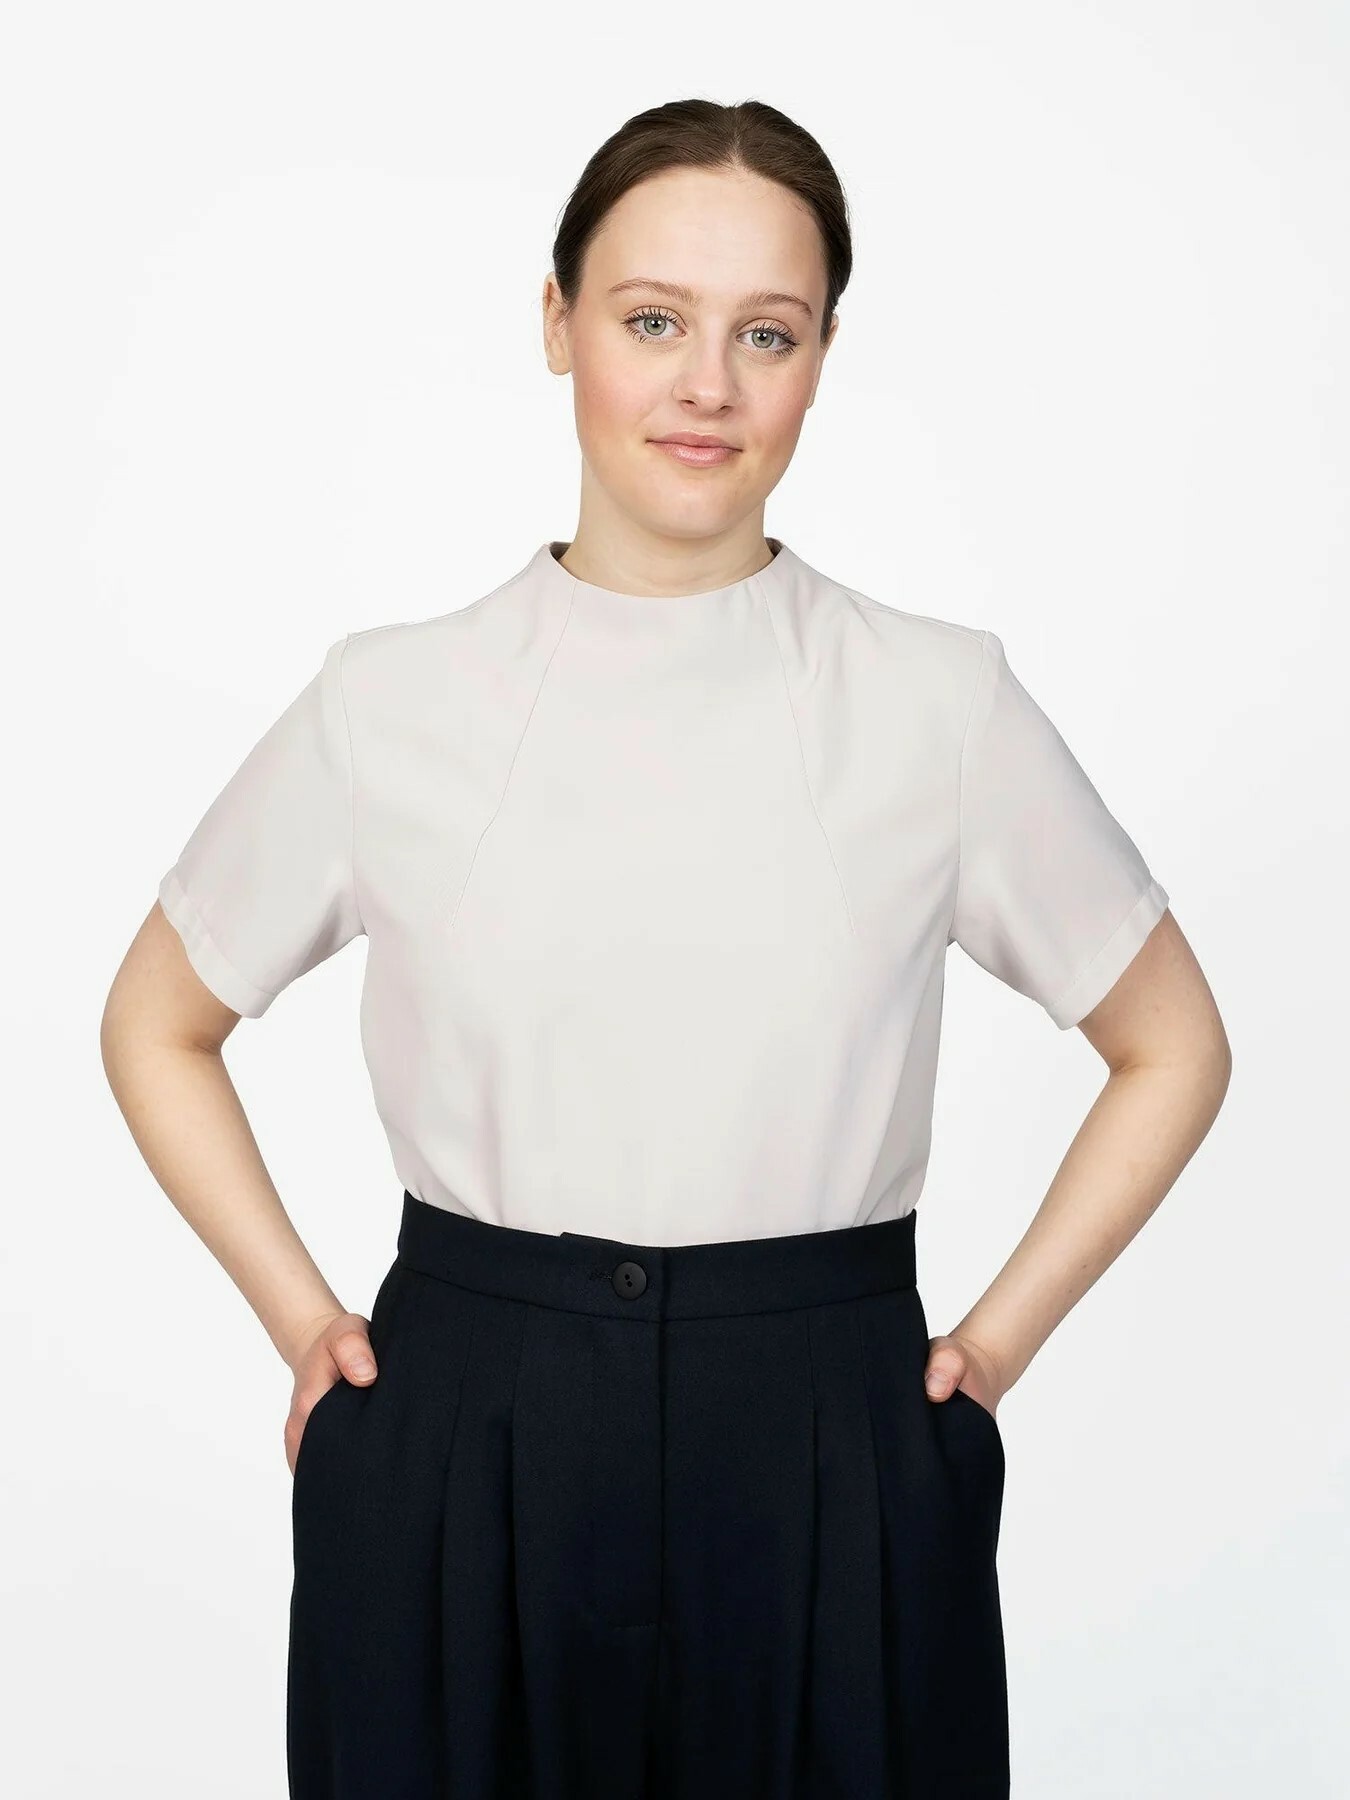 Buy The Assembly Line Funnel Neck Top Sewing Pattern